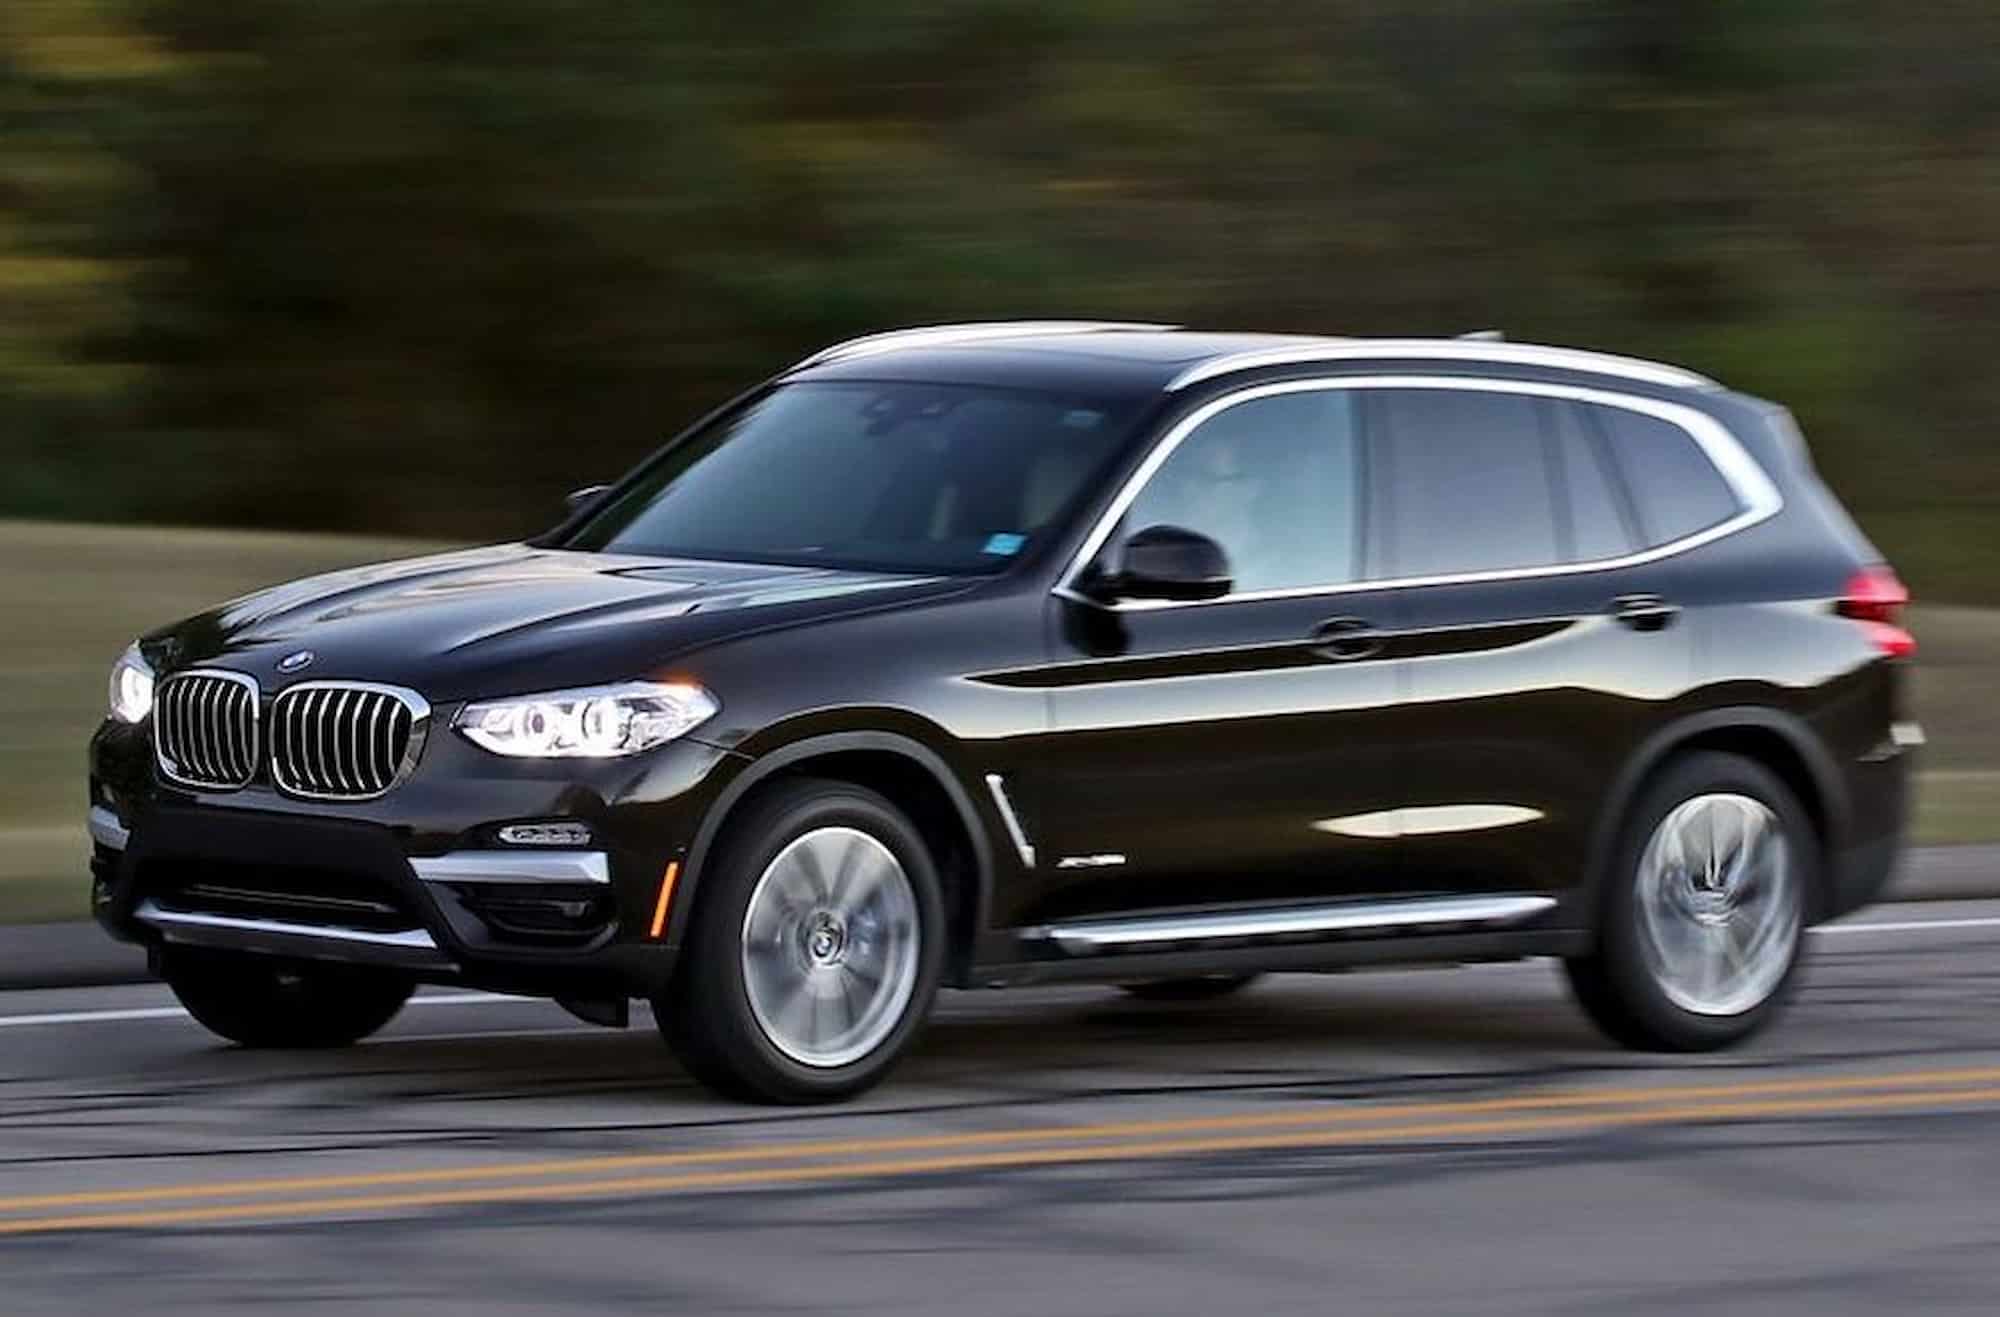 2018 bmw x3 xdrive30i test review car and driver photo 703244 s original